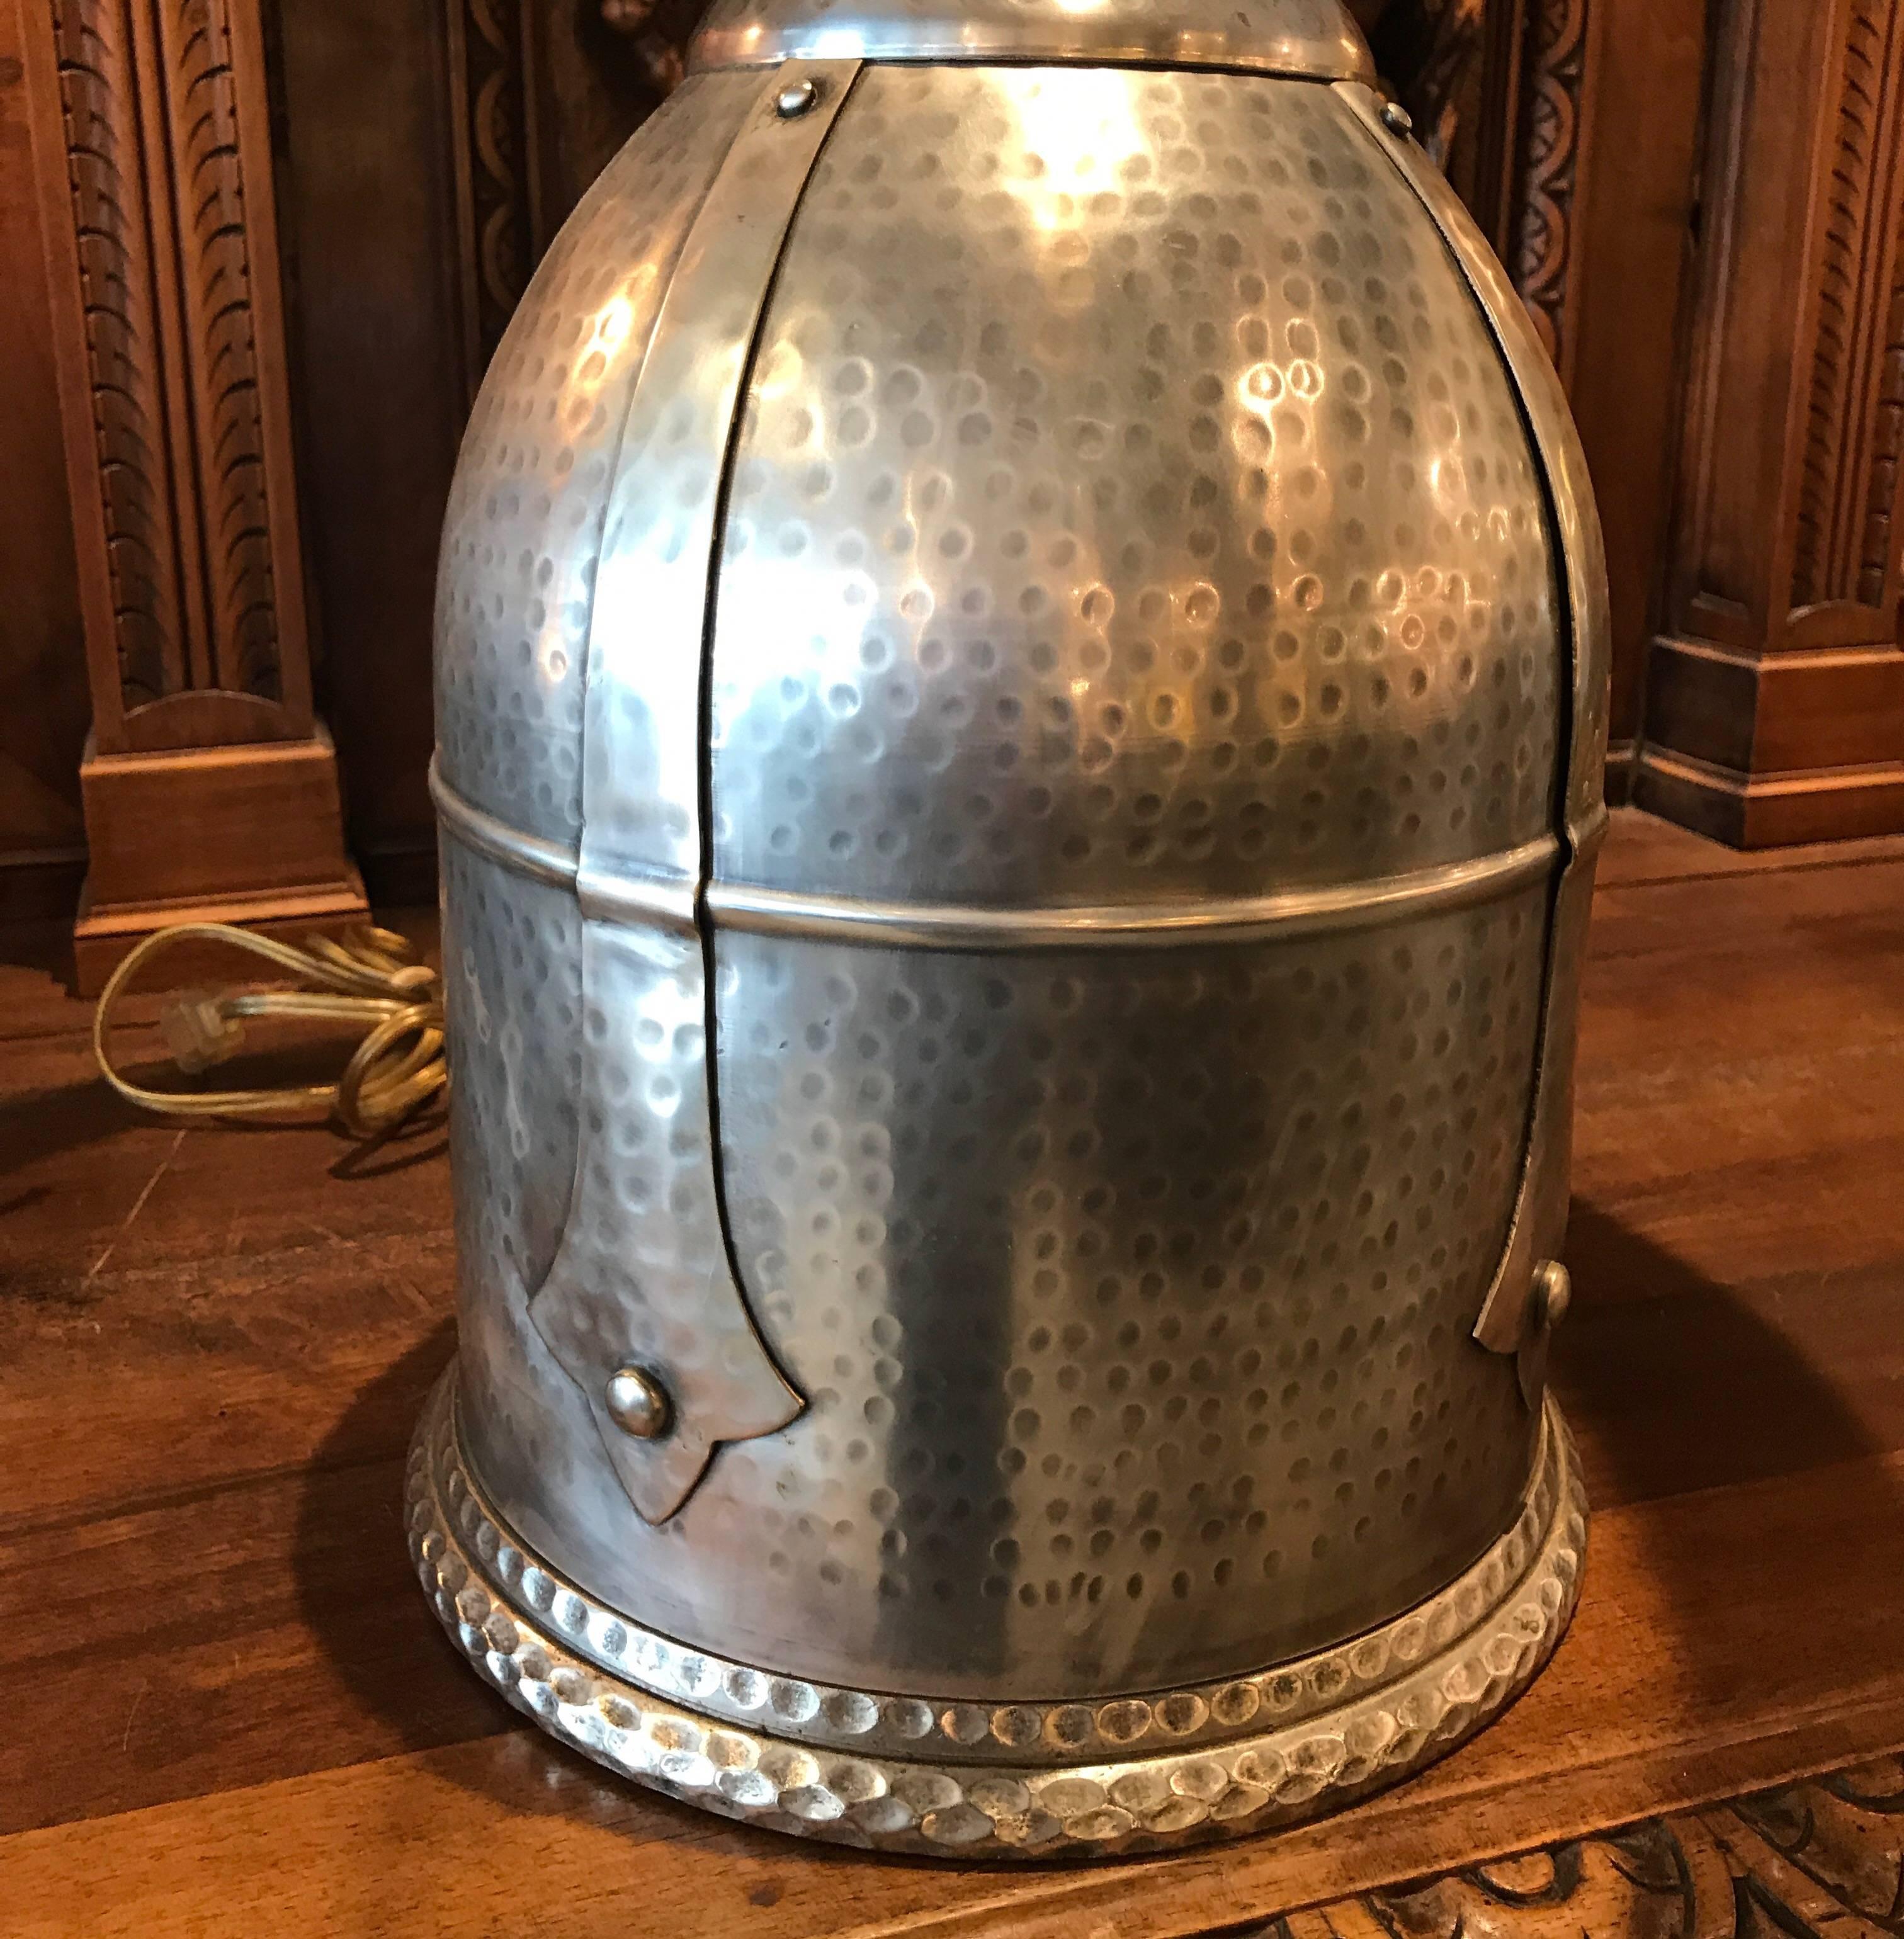 A fine pair of silvered brass or bronze hand-hammered lamps. The height of the lamp ti the socket is 17 inches, the height to the top of the harp is 24 inches, this can be adjusted higher based on the shade used. The diameter of the base is 10